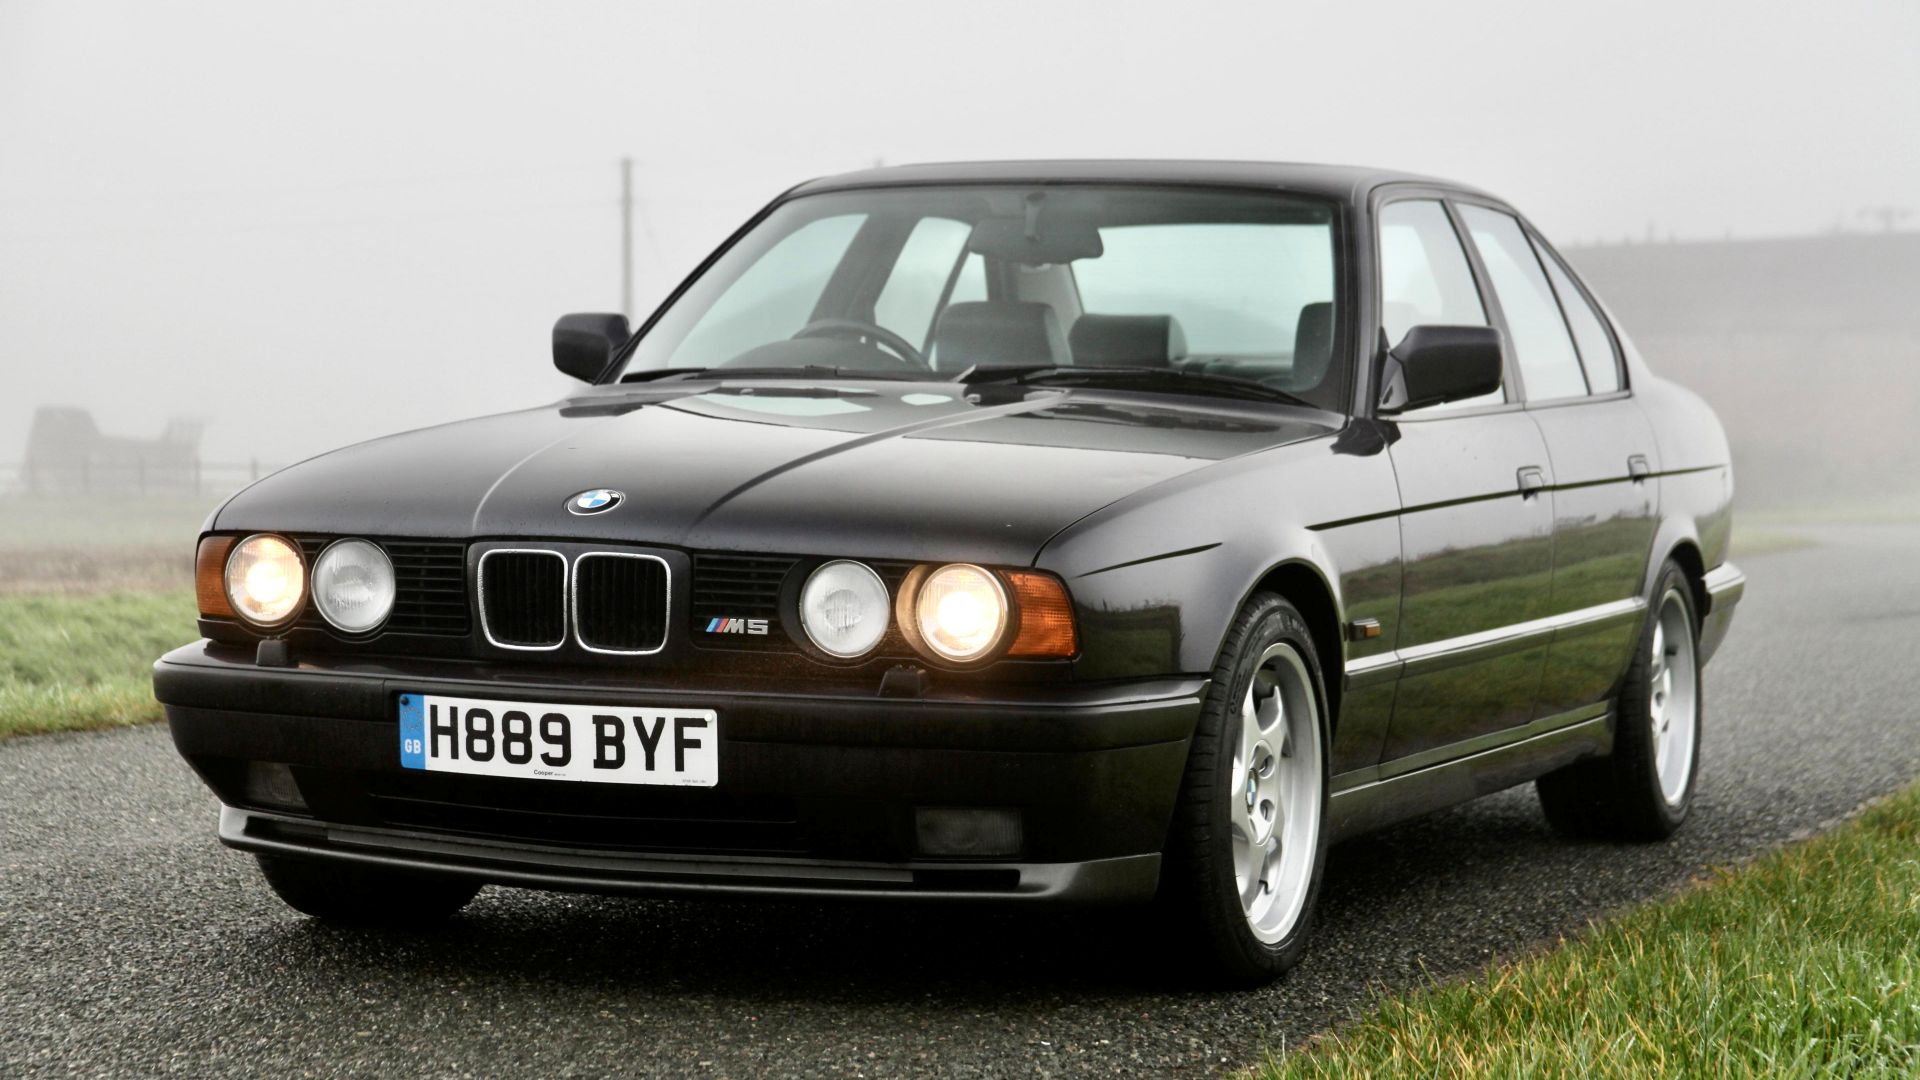 Auction Car of the Week: 1990 BMW E34 M5